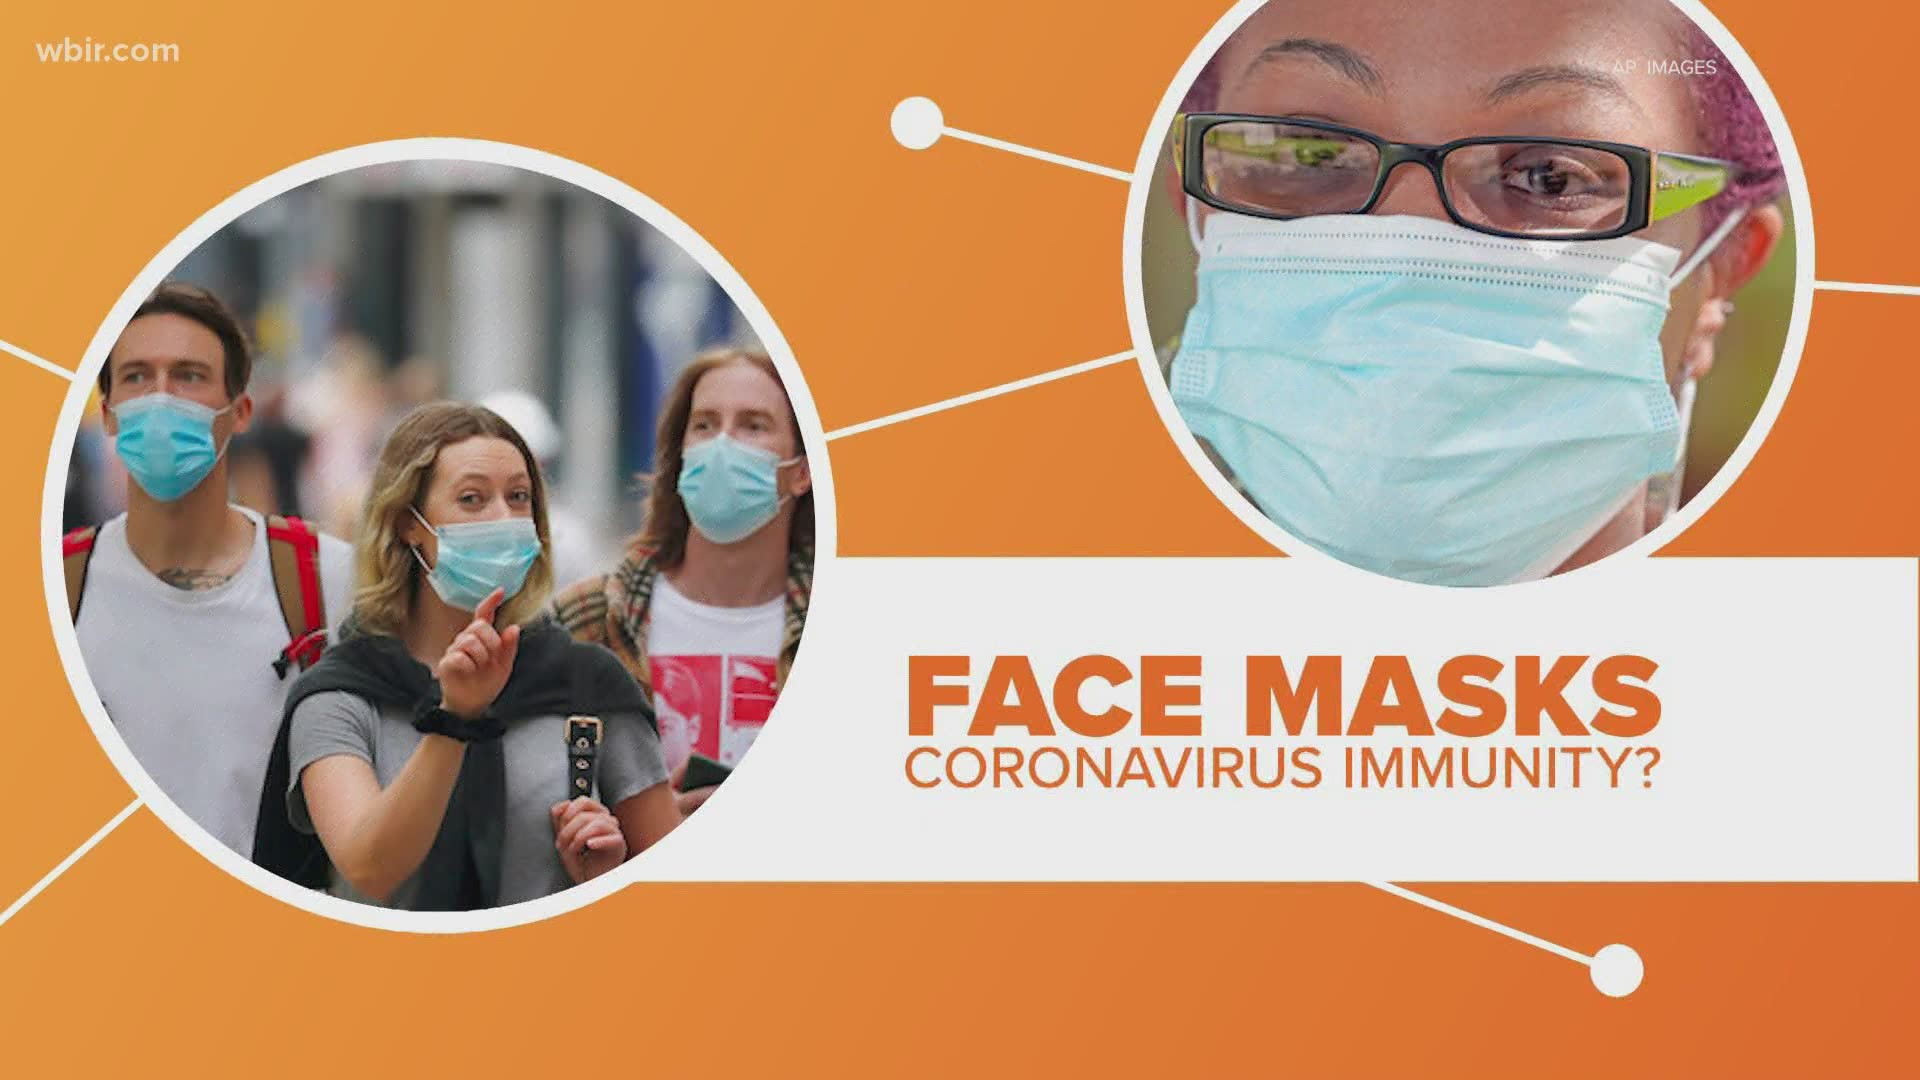 Researchers studying coronavirus have an intriguing new idea: face masks could be operating as a type of vaccine for COVID-19. Let's connect the dots.